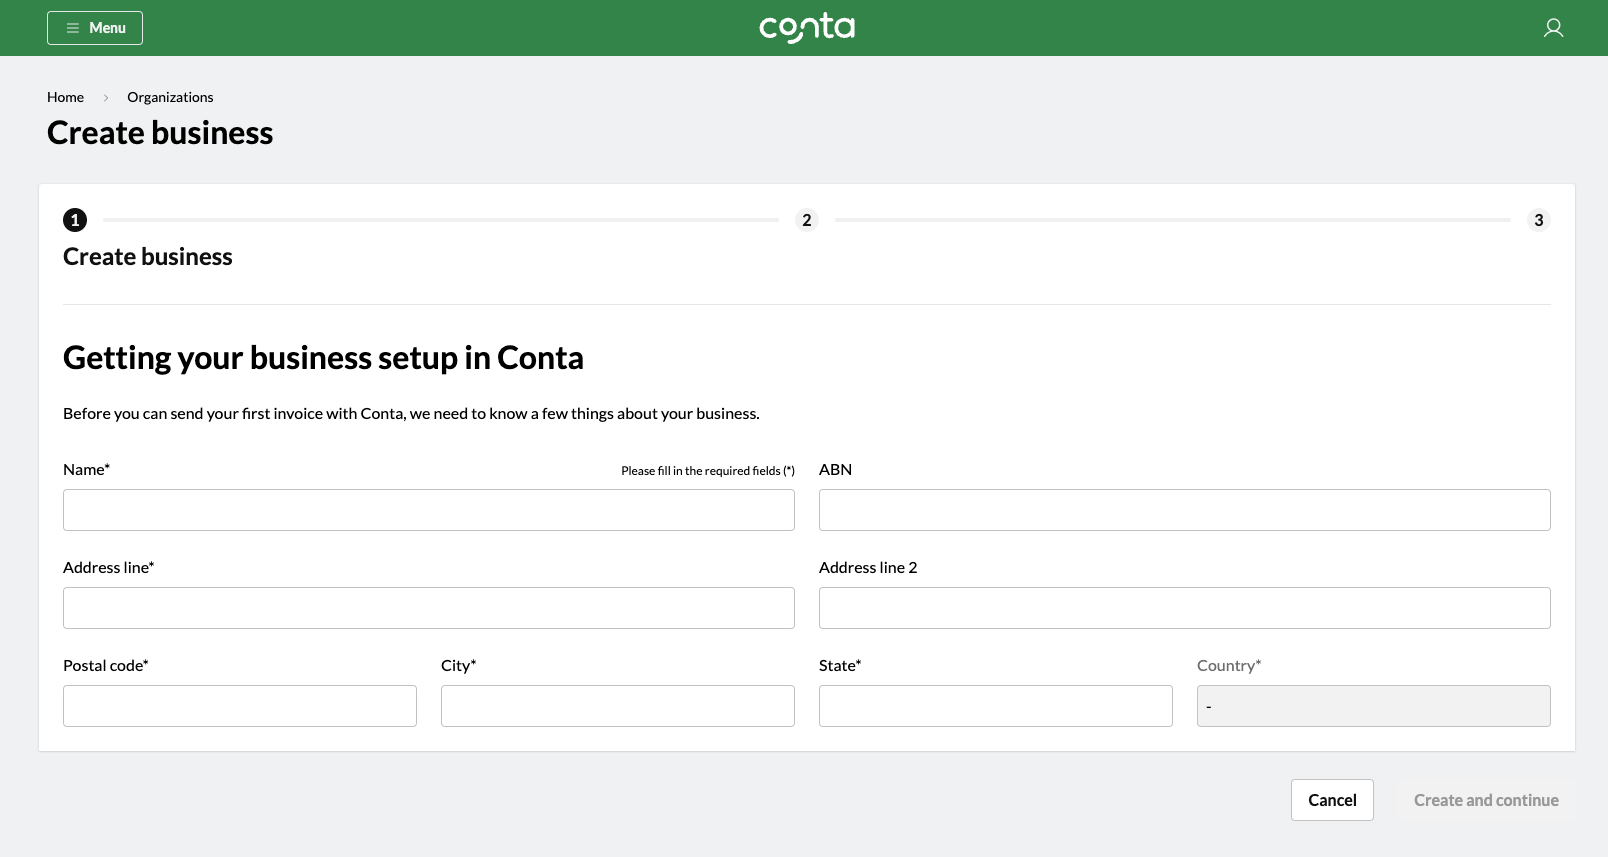 The business set-up in Conta, where you can add your business details. These will appear on your invoices.